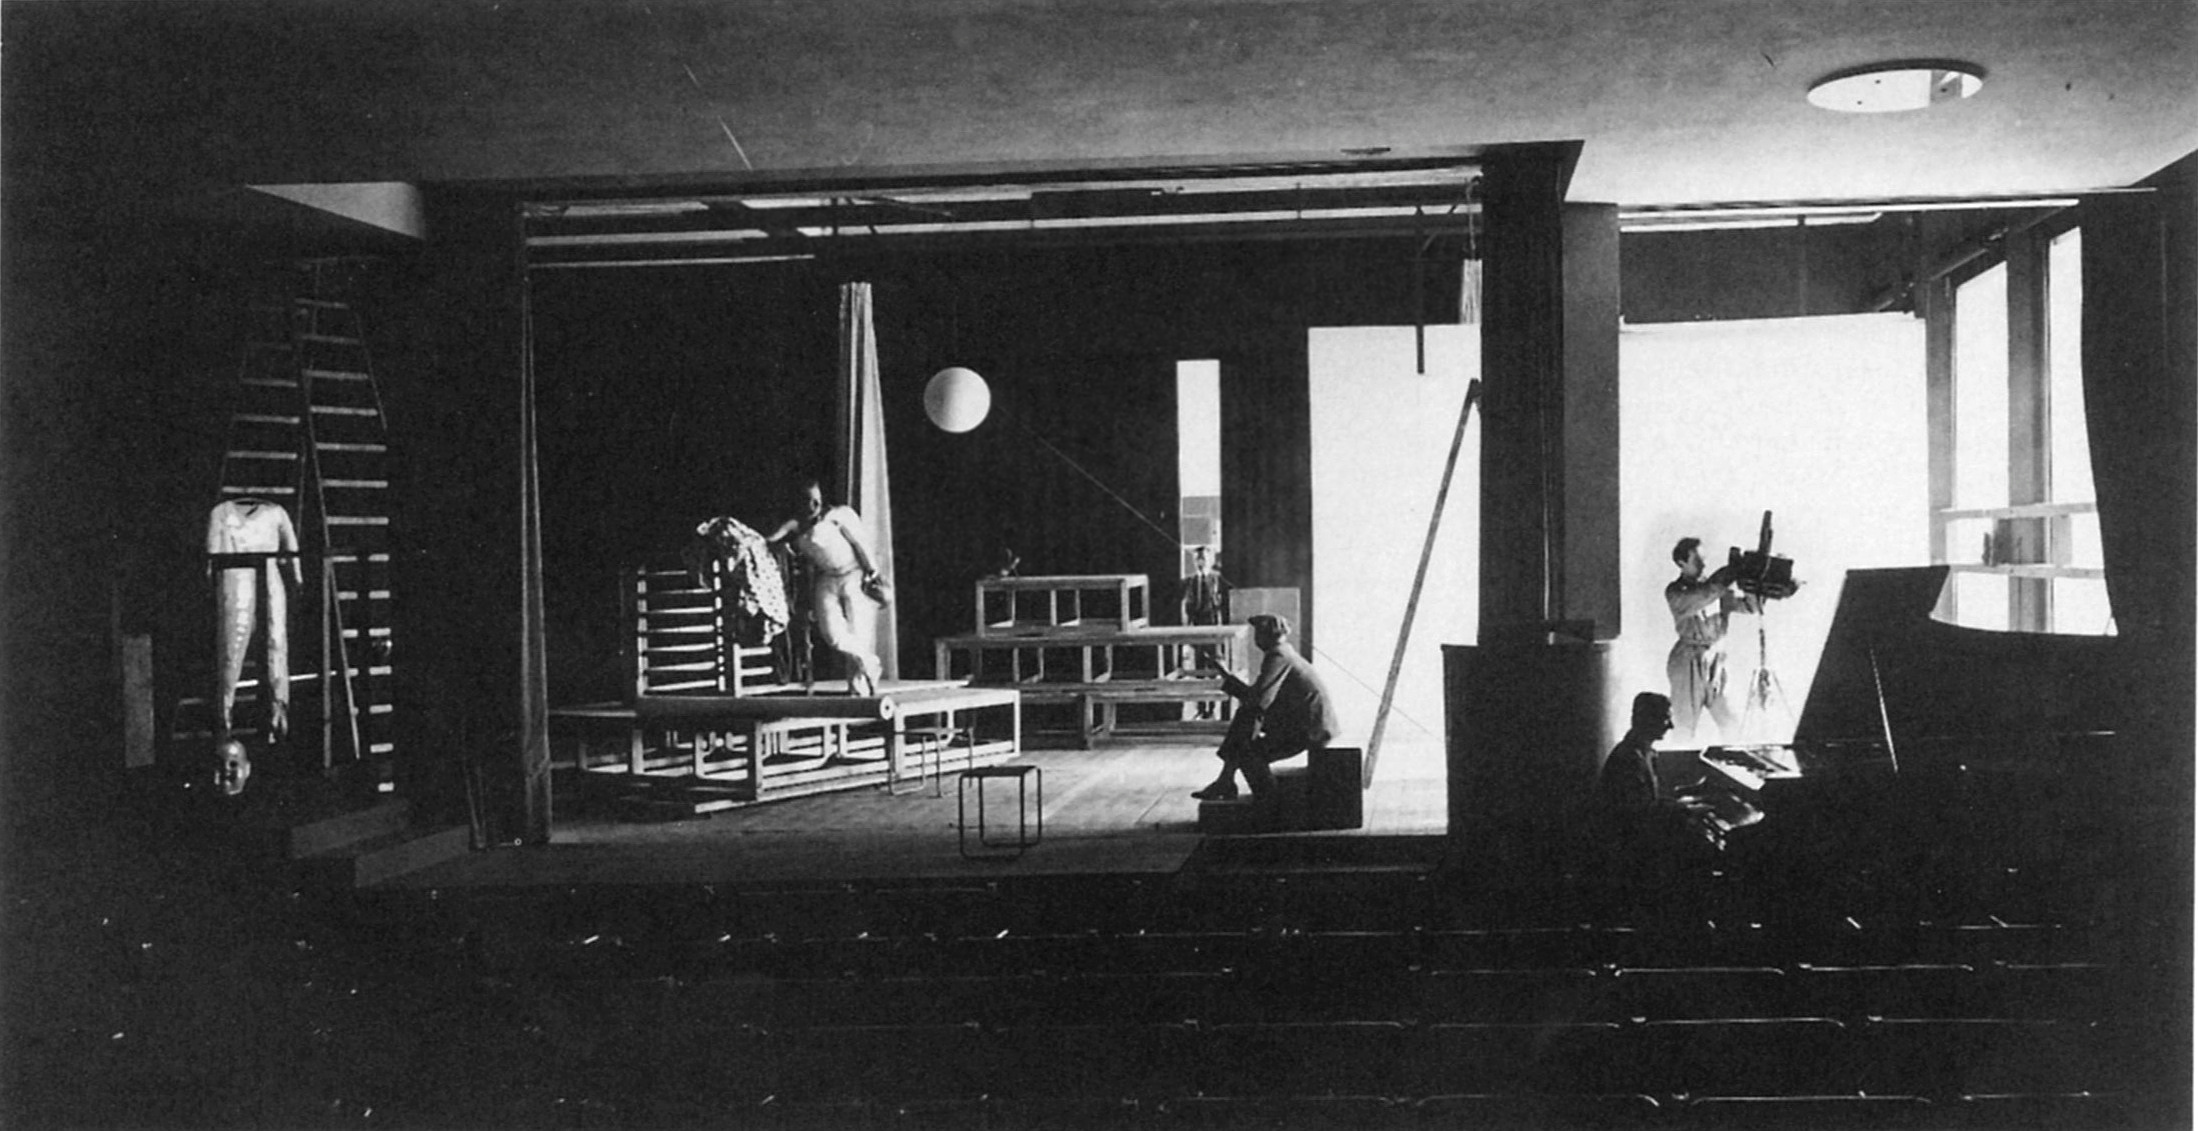 Inside the Bauhaus Dessau theater facility, designed by Walter Gropius (1926). Photo by Erich Consemüller.